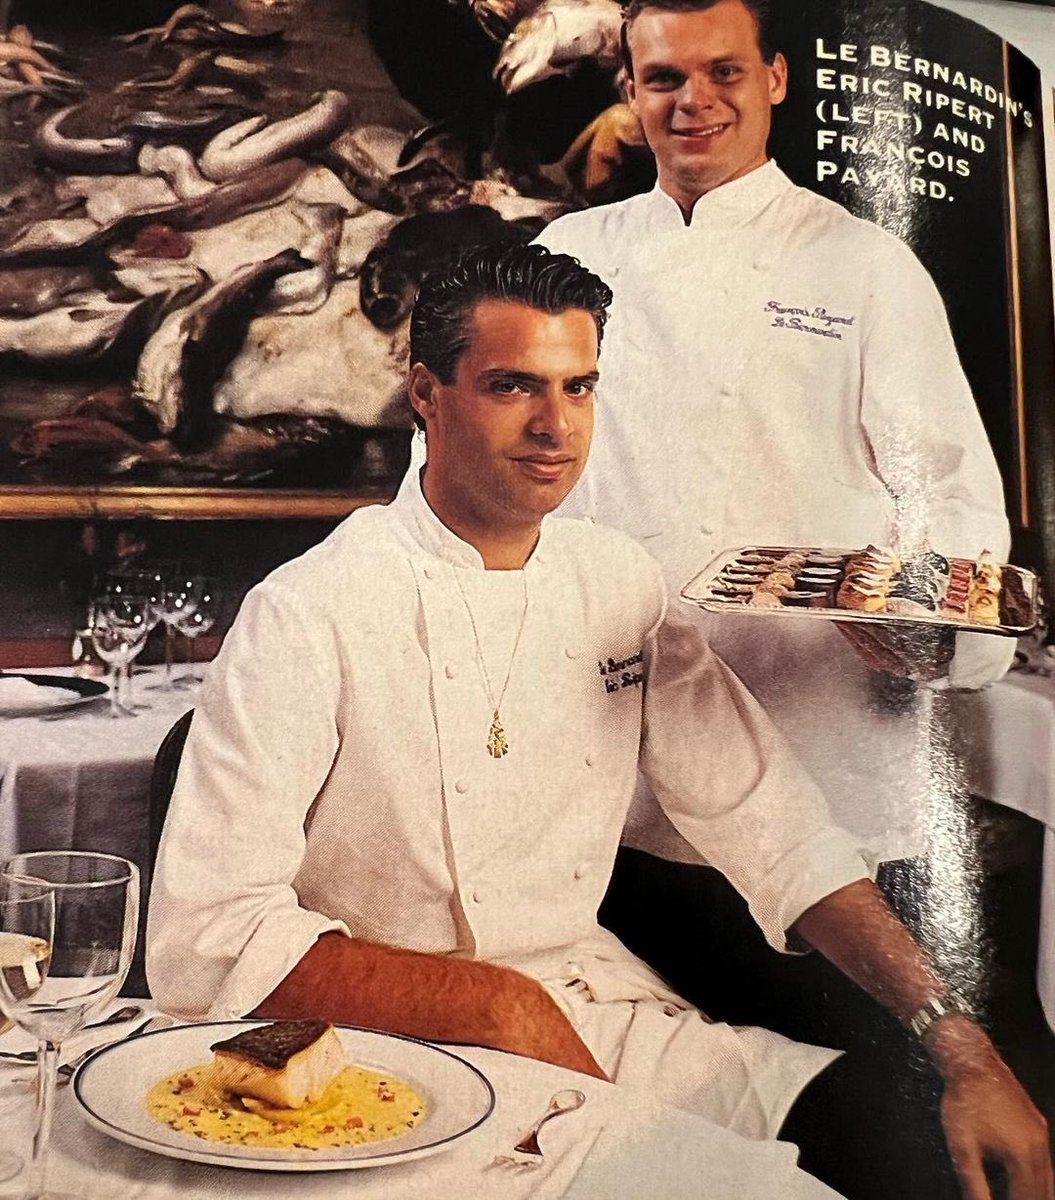 TBT 1992 This picture for a magazine was taken @LeBernardinNY where I started as chef de cuisine (I was 26) My dear friend @francoispayard was the pastry chef... The rest is history... THX Drew Nieporent for keeping the best archives of our industry.